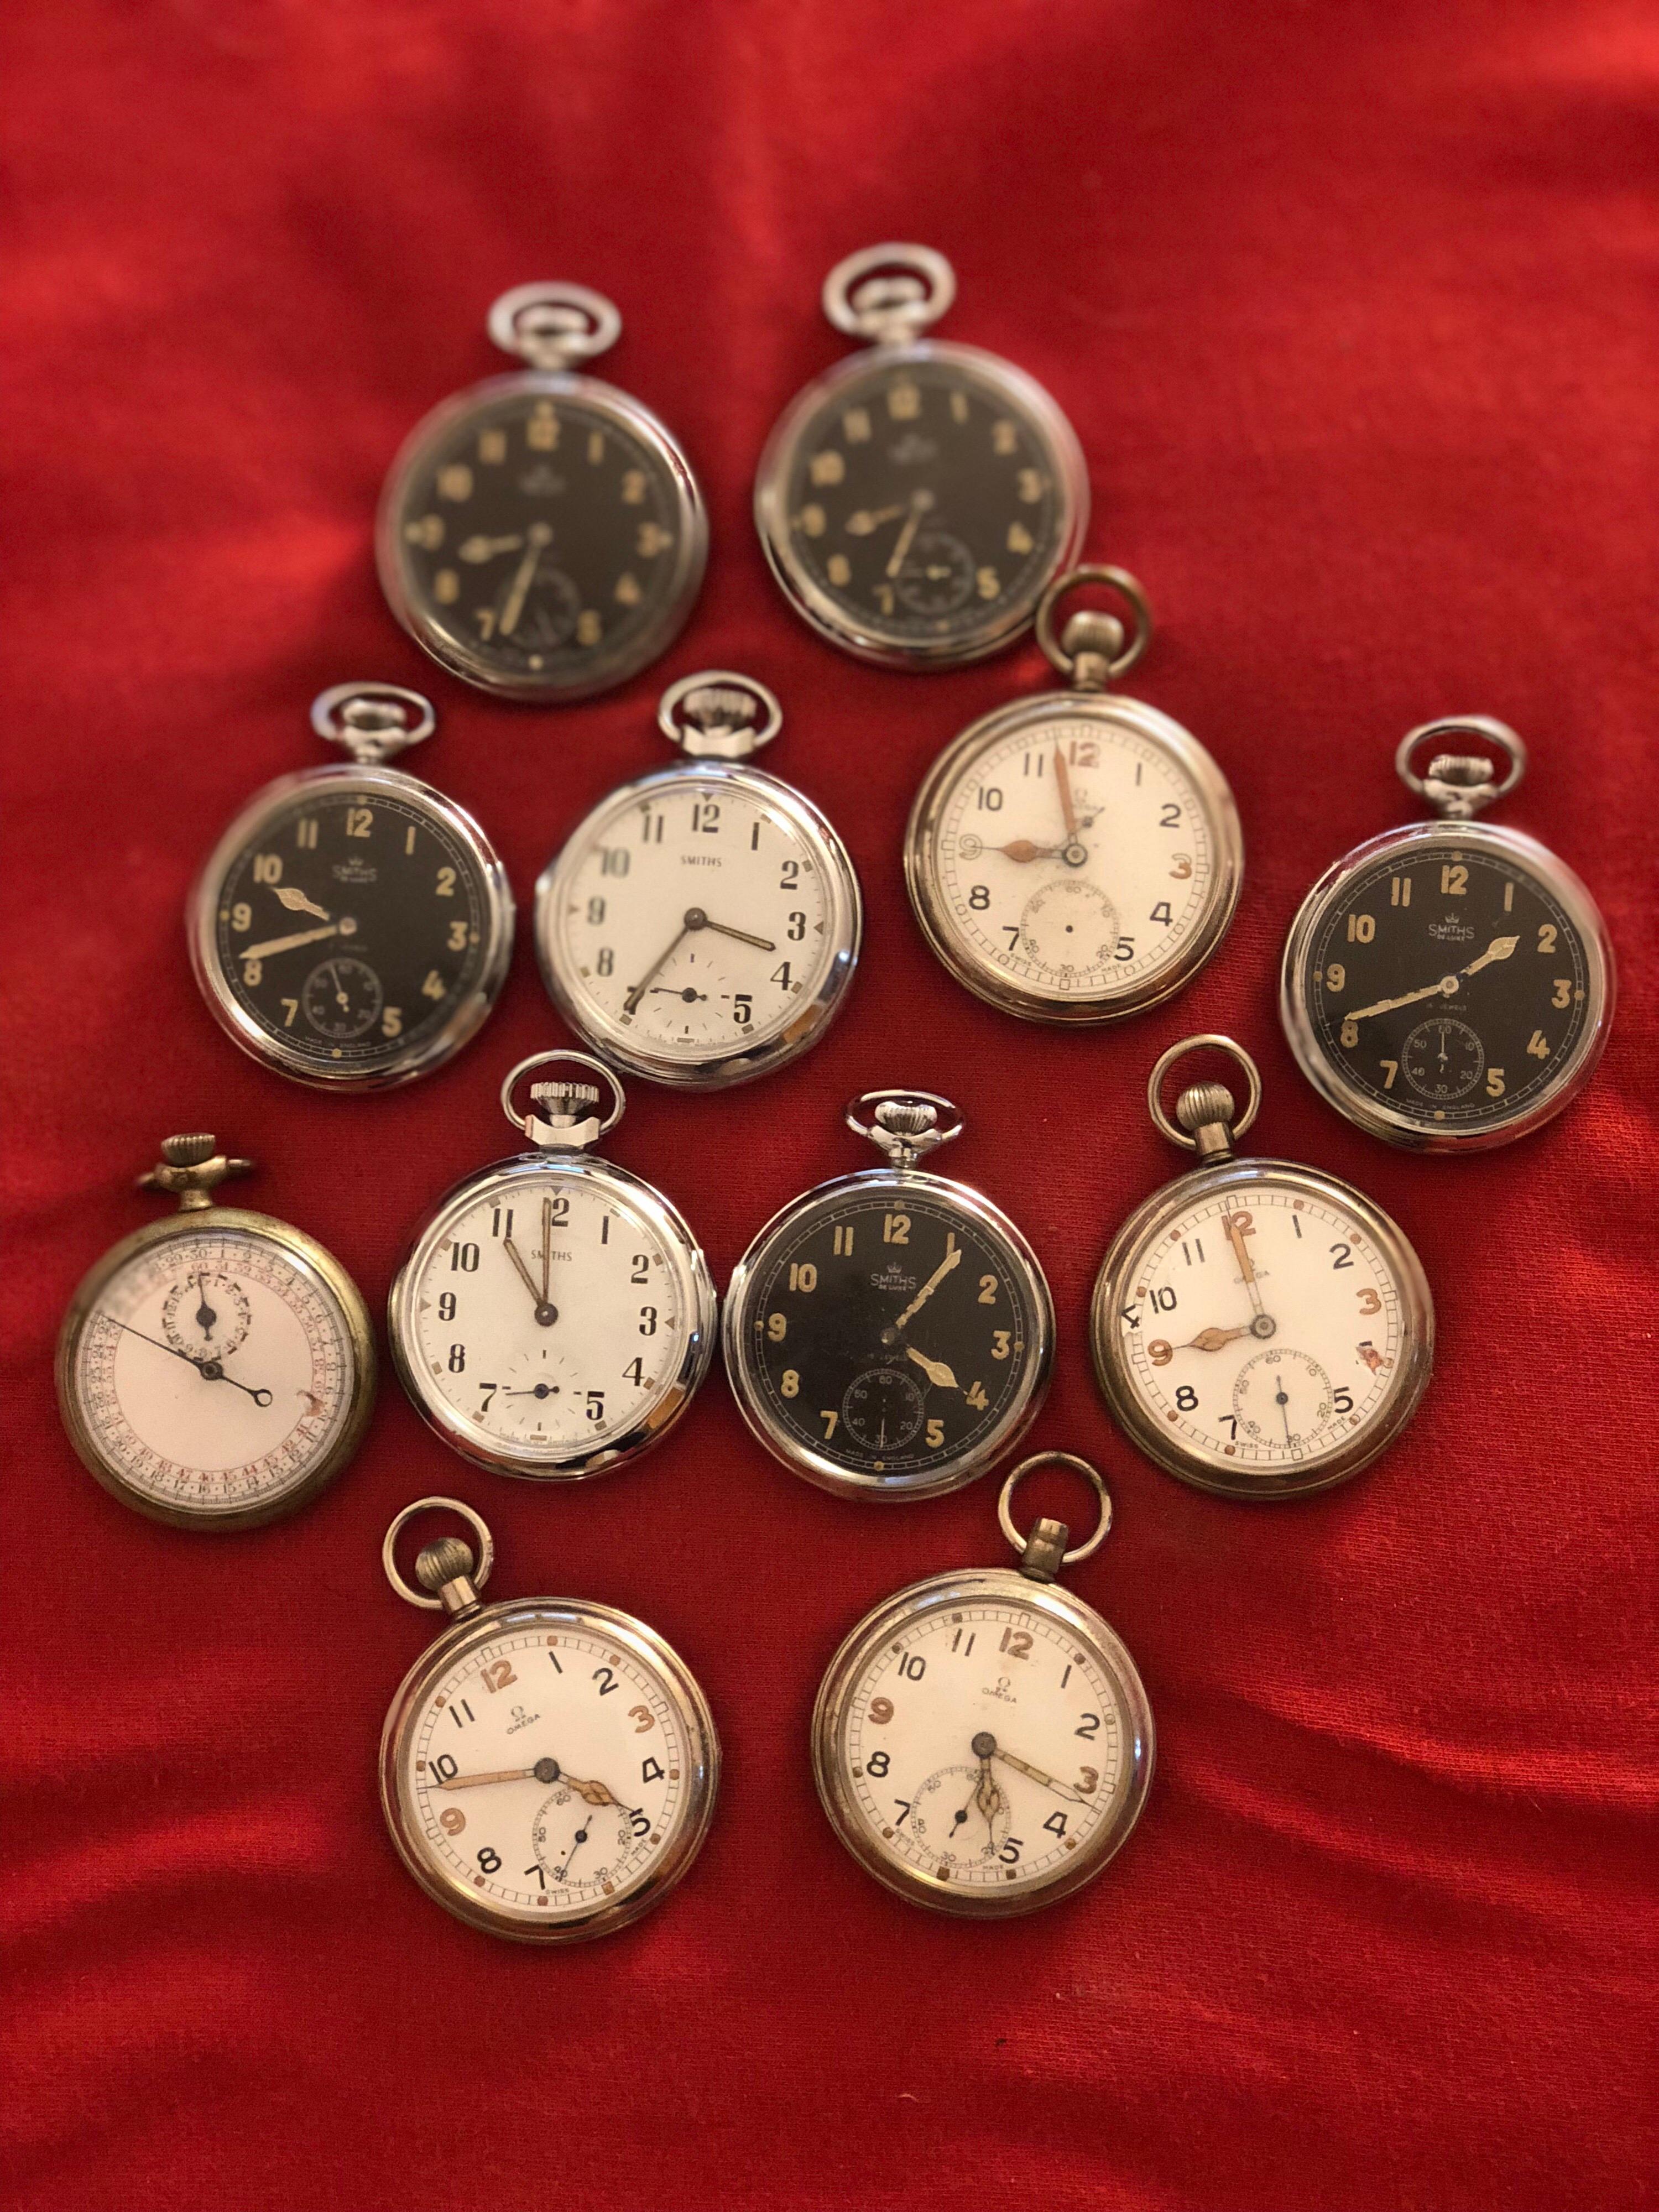 Beautiful collection of authentic pocket watches

International Shipping
Our transportation of antique furniture is executed with utmost care and with personal flavor in order pick up or bring your precious furniture.

Approved Quality
Silvia